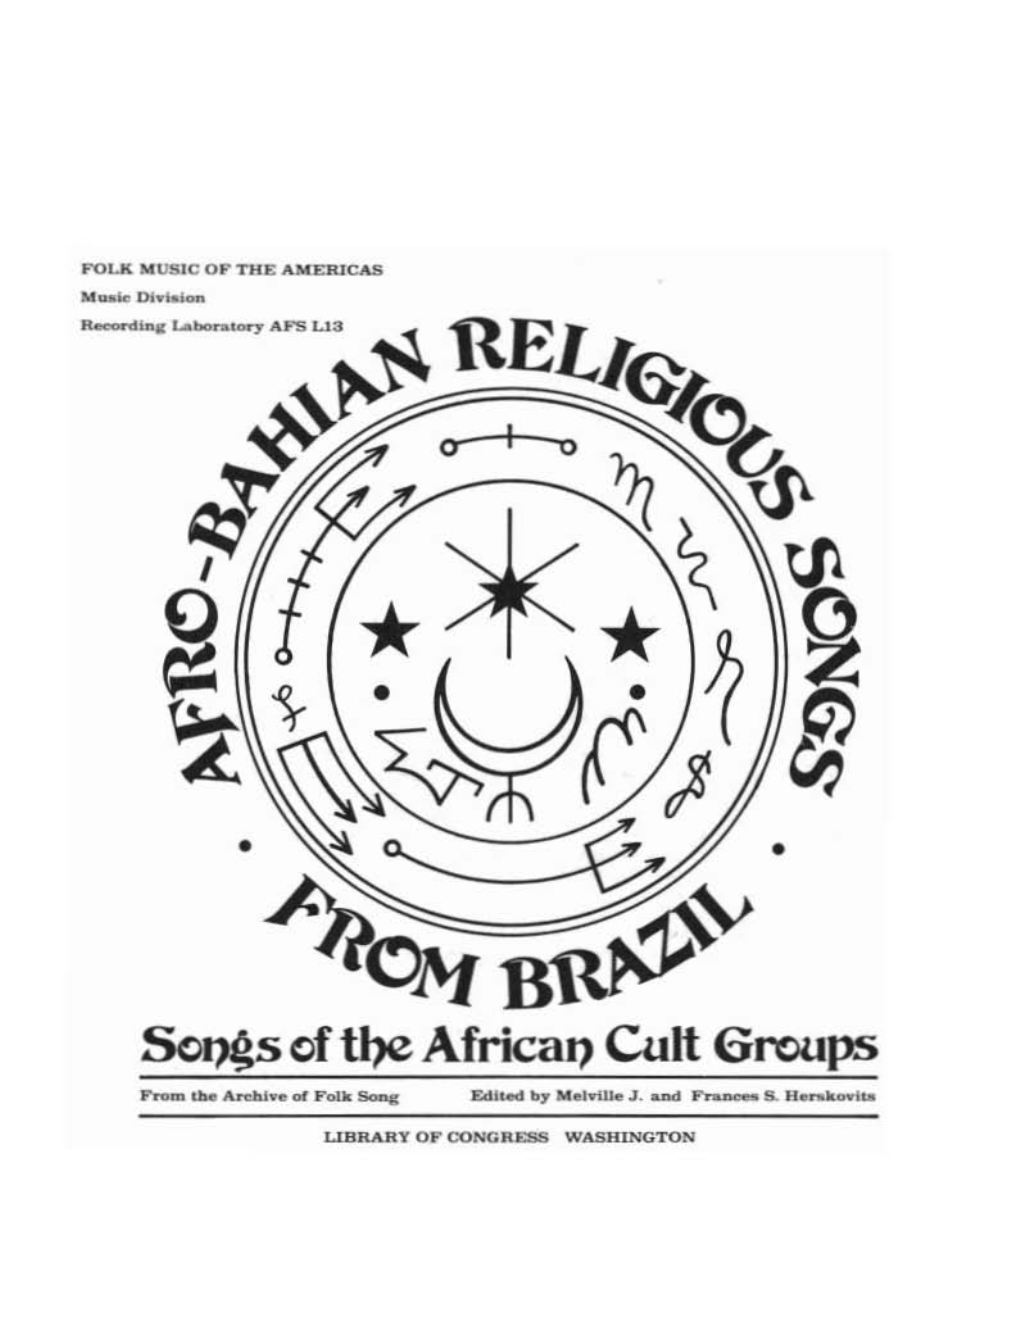 Afro-Bahaian Religious Songs from Brazil AFS